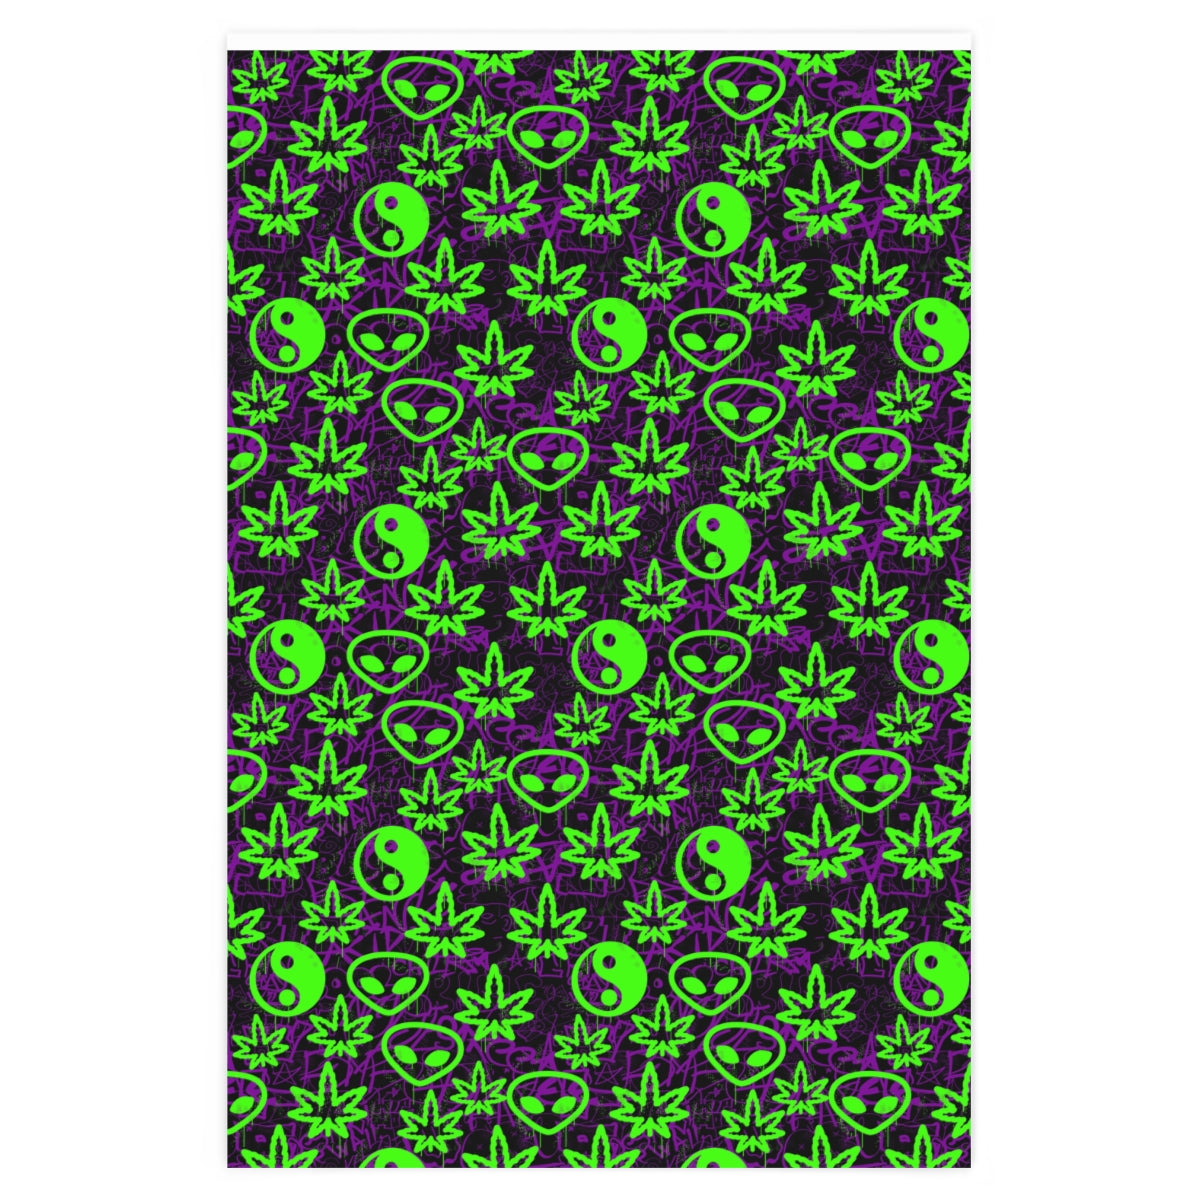 Alien Wrapping paper and book cover